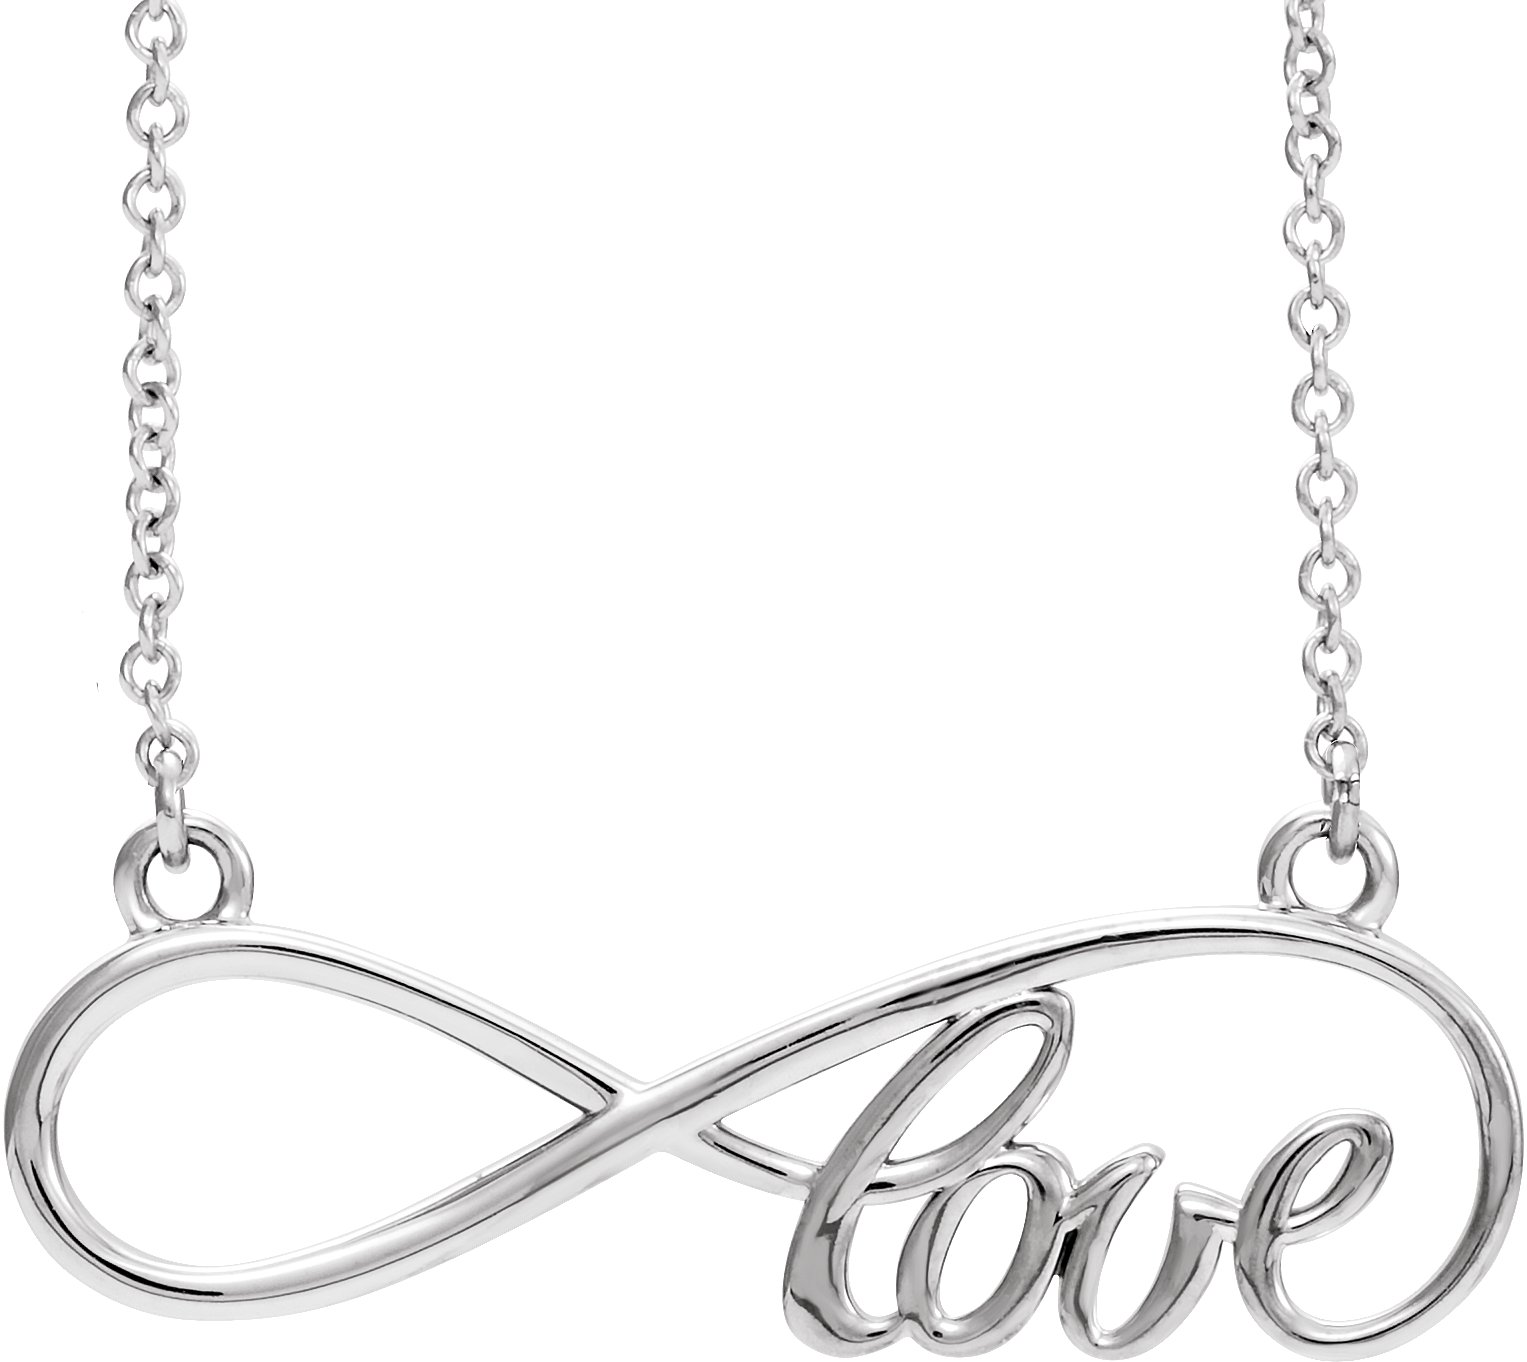 Sterling Silver 27.5x8.4 mm Infinity Inspired Love 17 inch Necklace Ref. 12378738